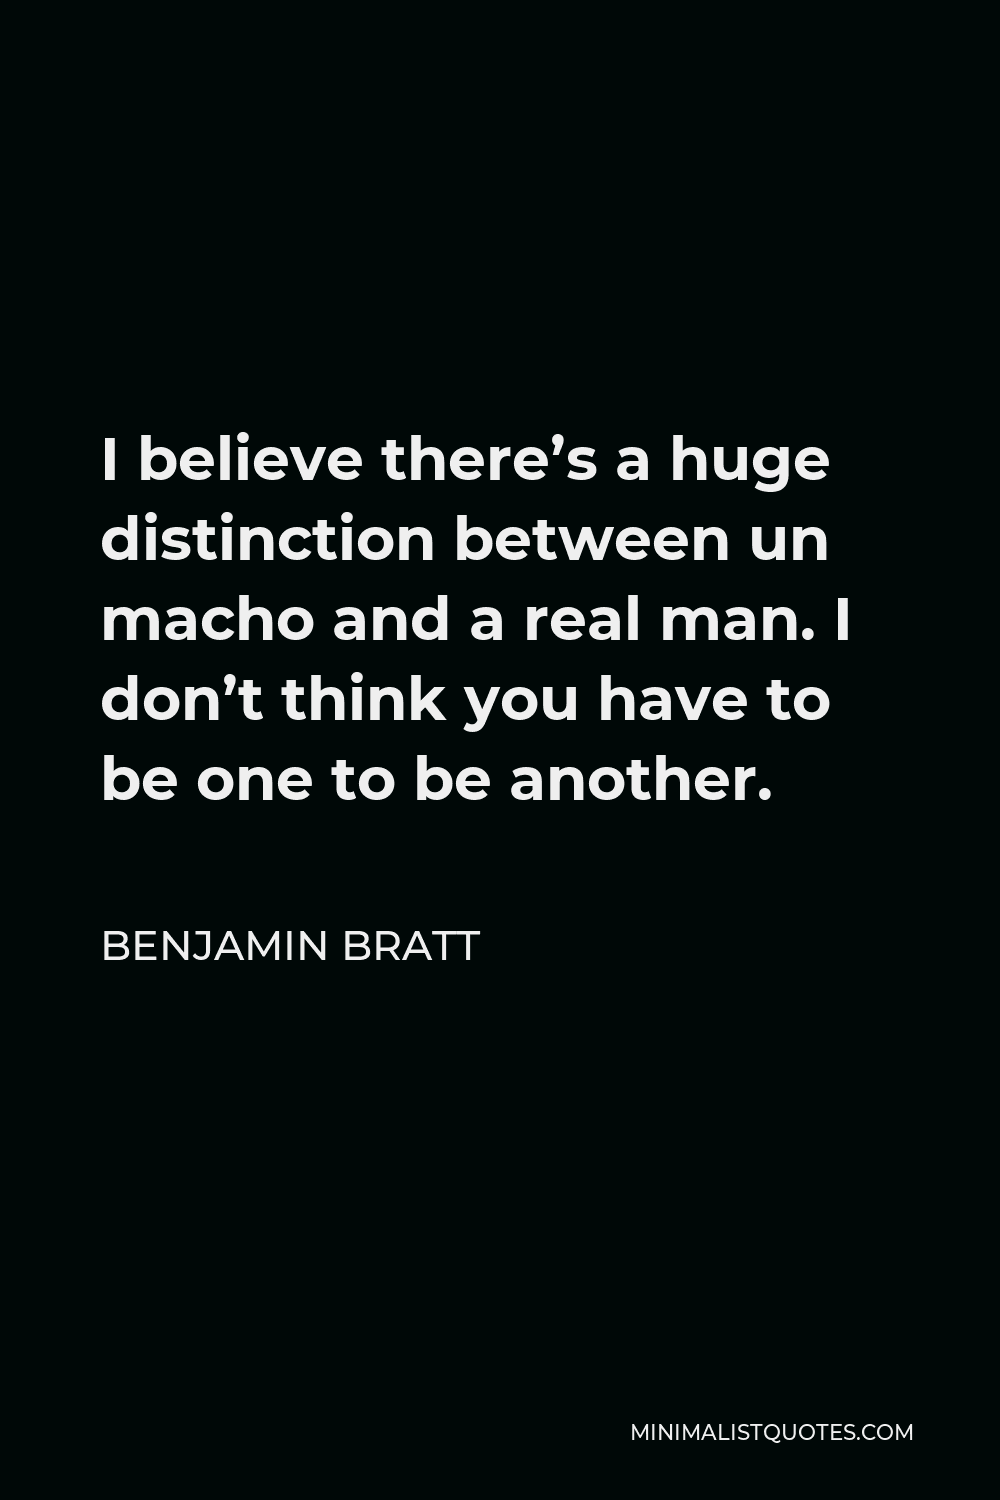 Benjamin Bratt Quote - I believe there’s a huge distinction between un macho and a real man. I don’t think you have to be one to be another.